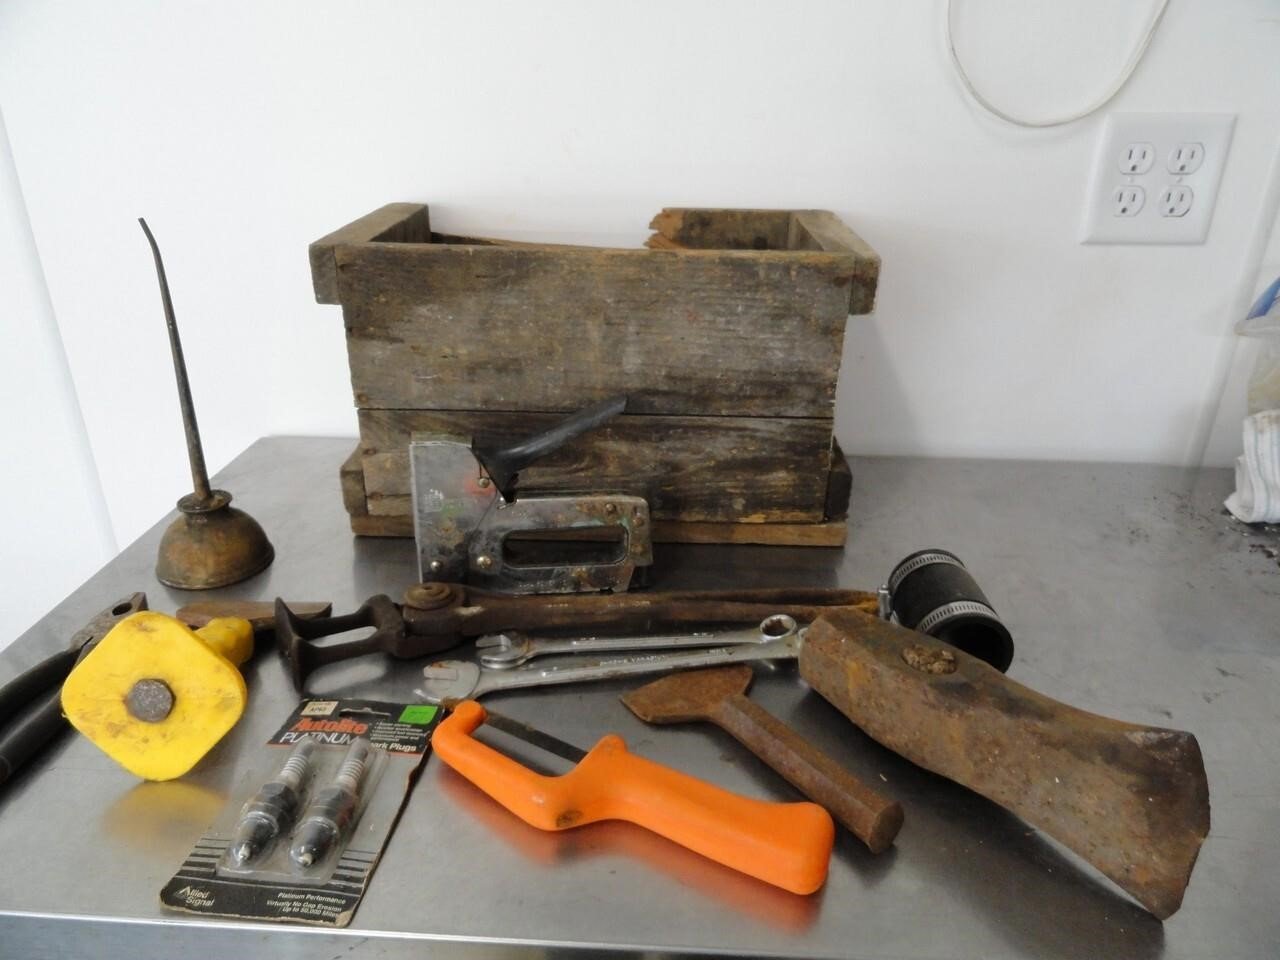 Tools with vintage box